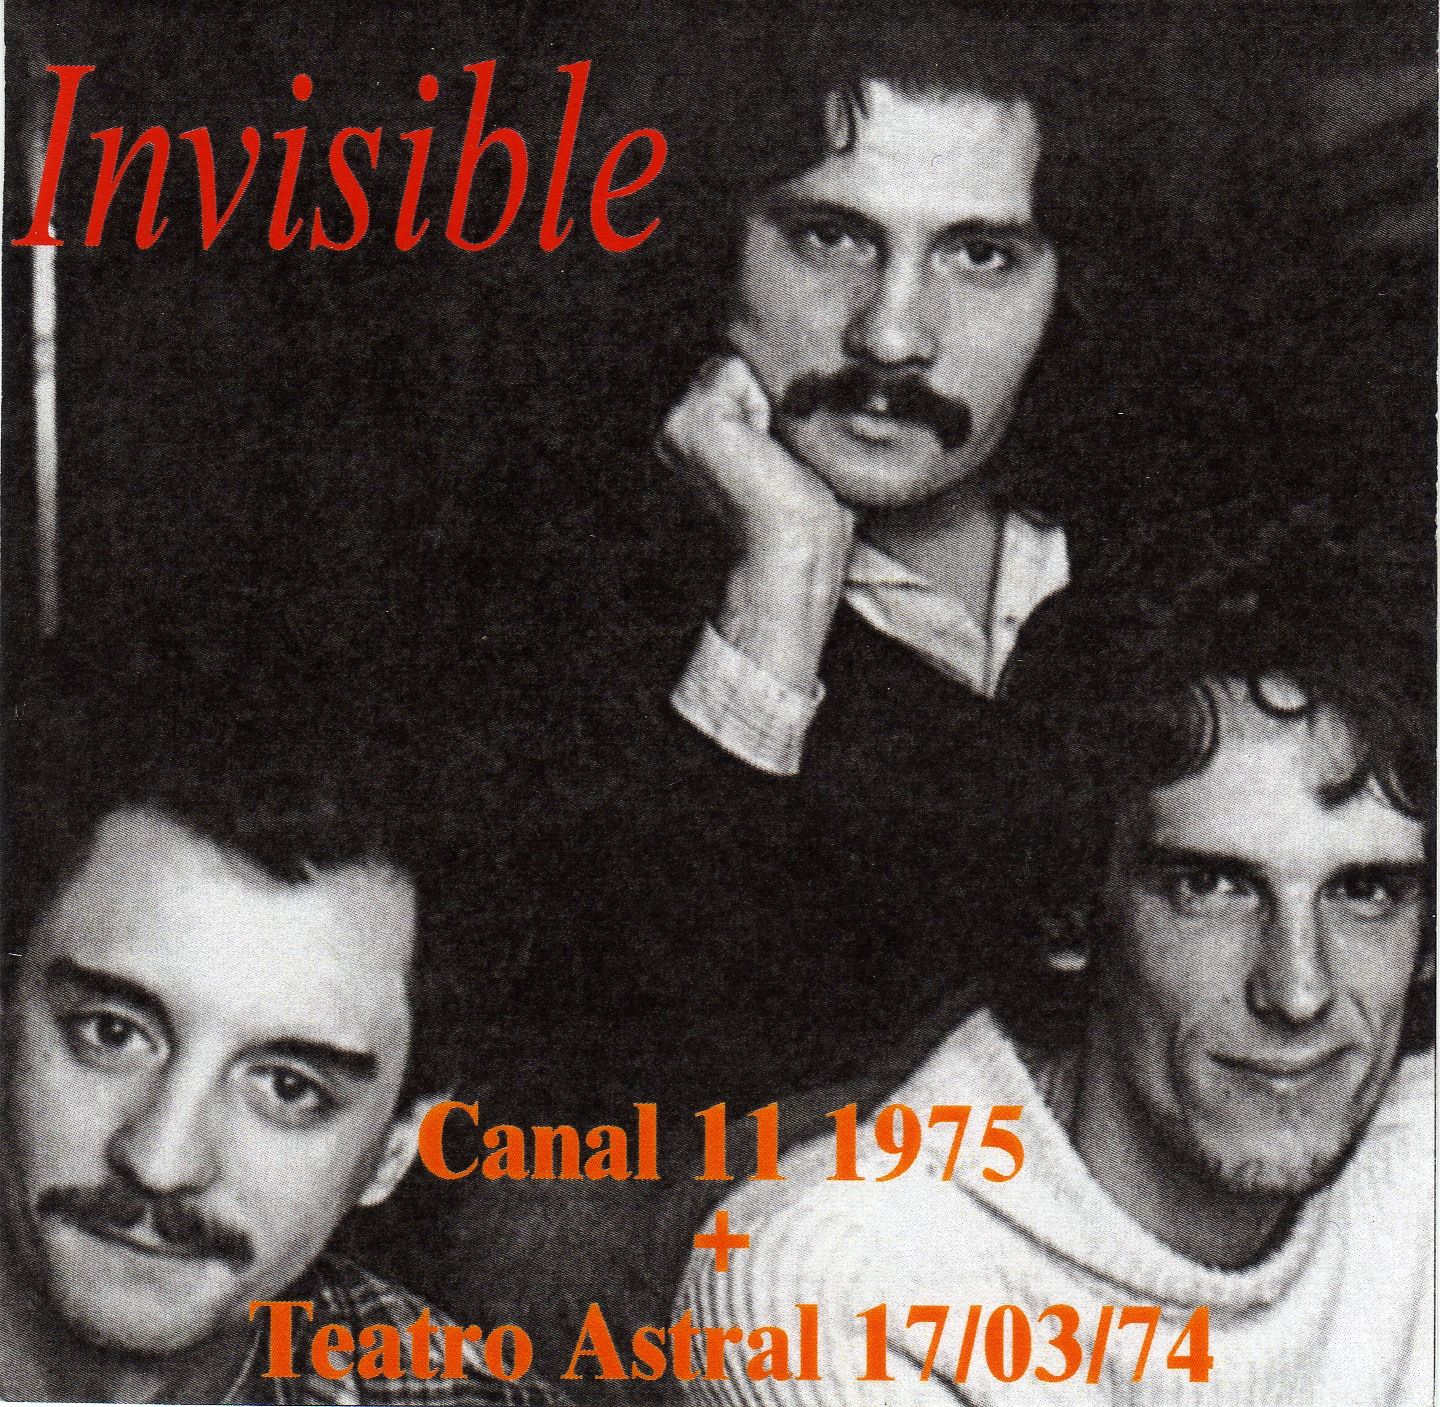 [Invisible+1974+Astral+1974+Canal+11+007.jpg]